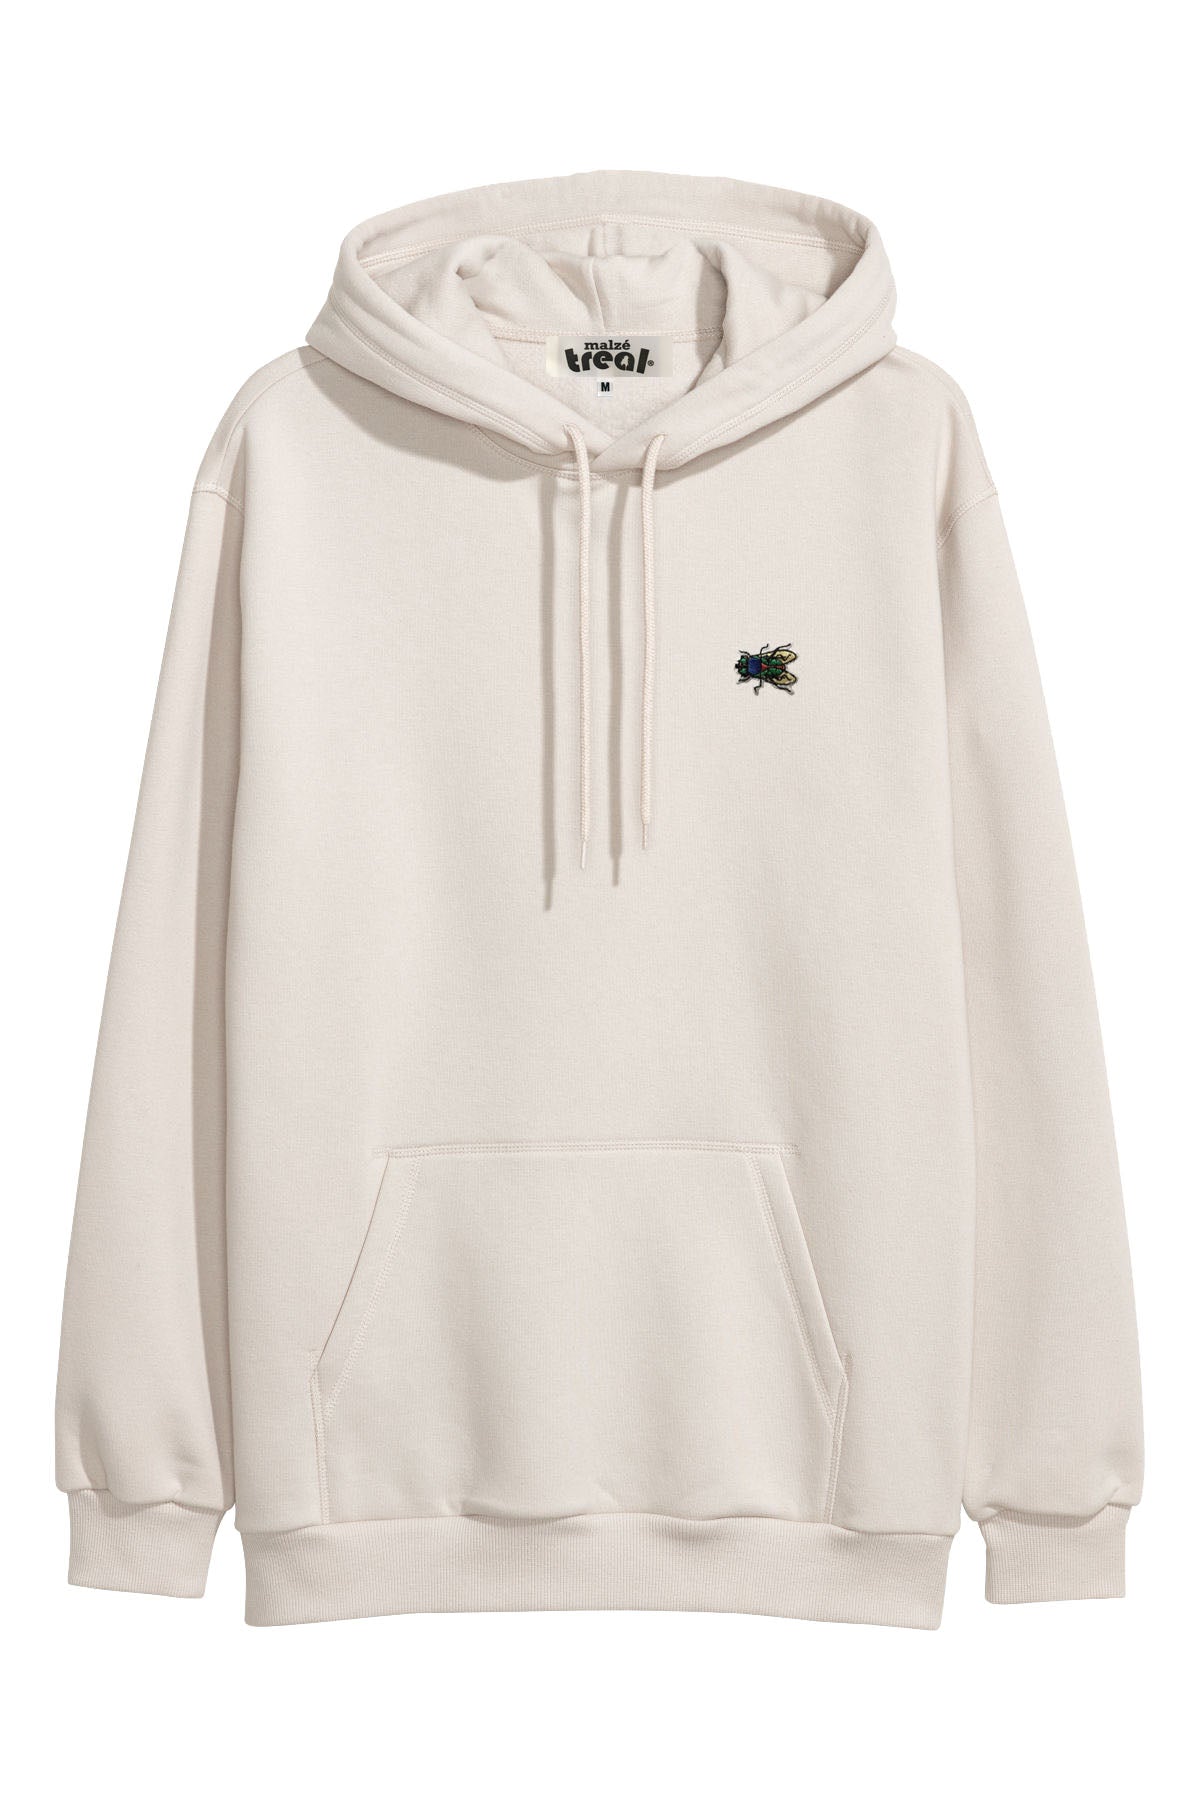 Malzé Treal Embroidered Pullover Hoodie Cream